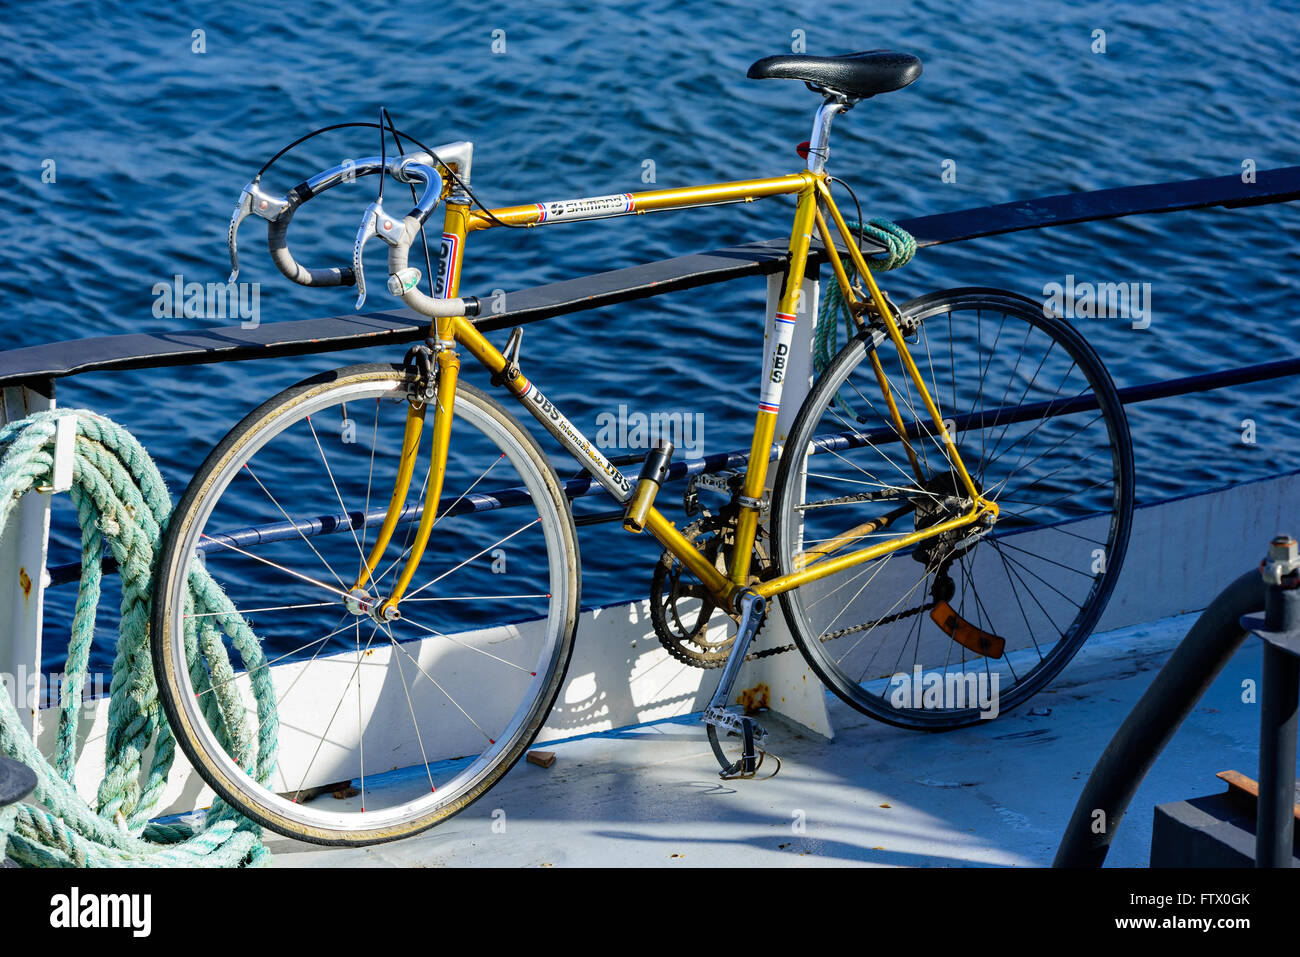 Karlskrona, Sweden - March 27, 2016: Yellow DBS bike tied to a boat railing. Stock Photo